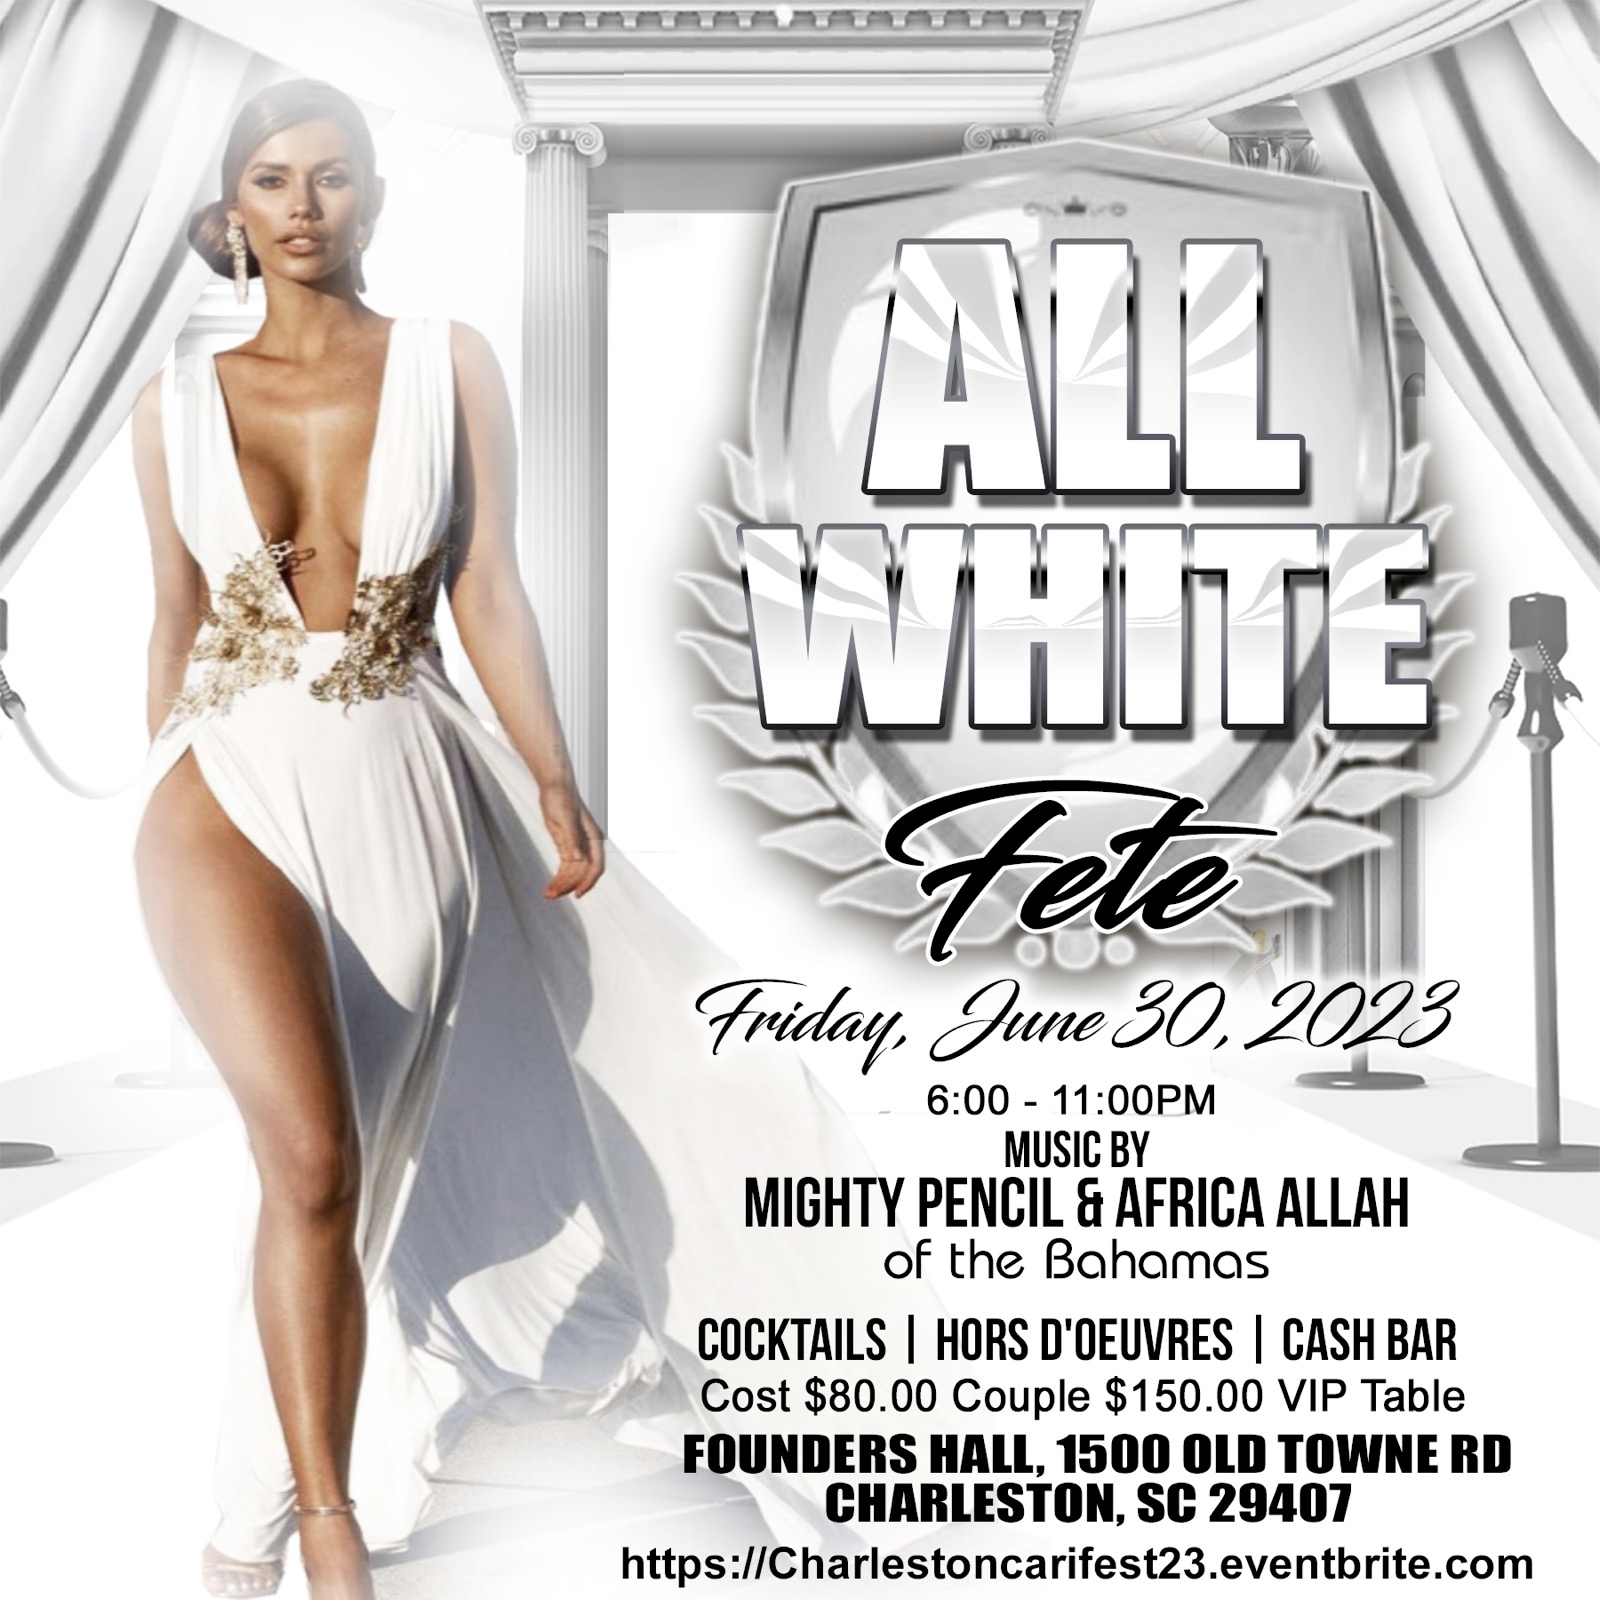 All White Fete Charleston, SC 6:00 – 11:00PM $80.00 single Couple $150.00 VIP Table 6-8. $800.00 Attire: All White. Welcome Cocktails, Hors d’oeuvres, Cash Bar